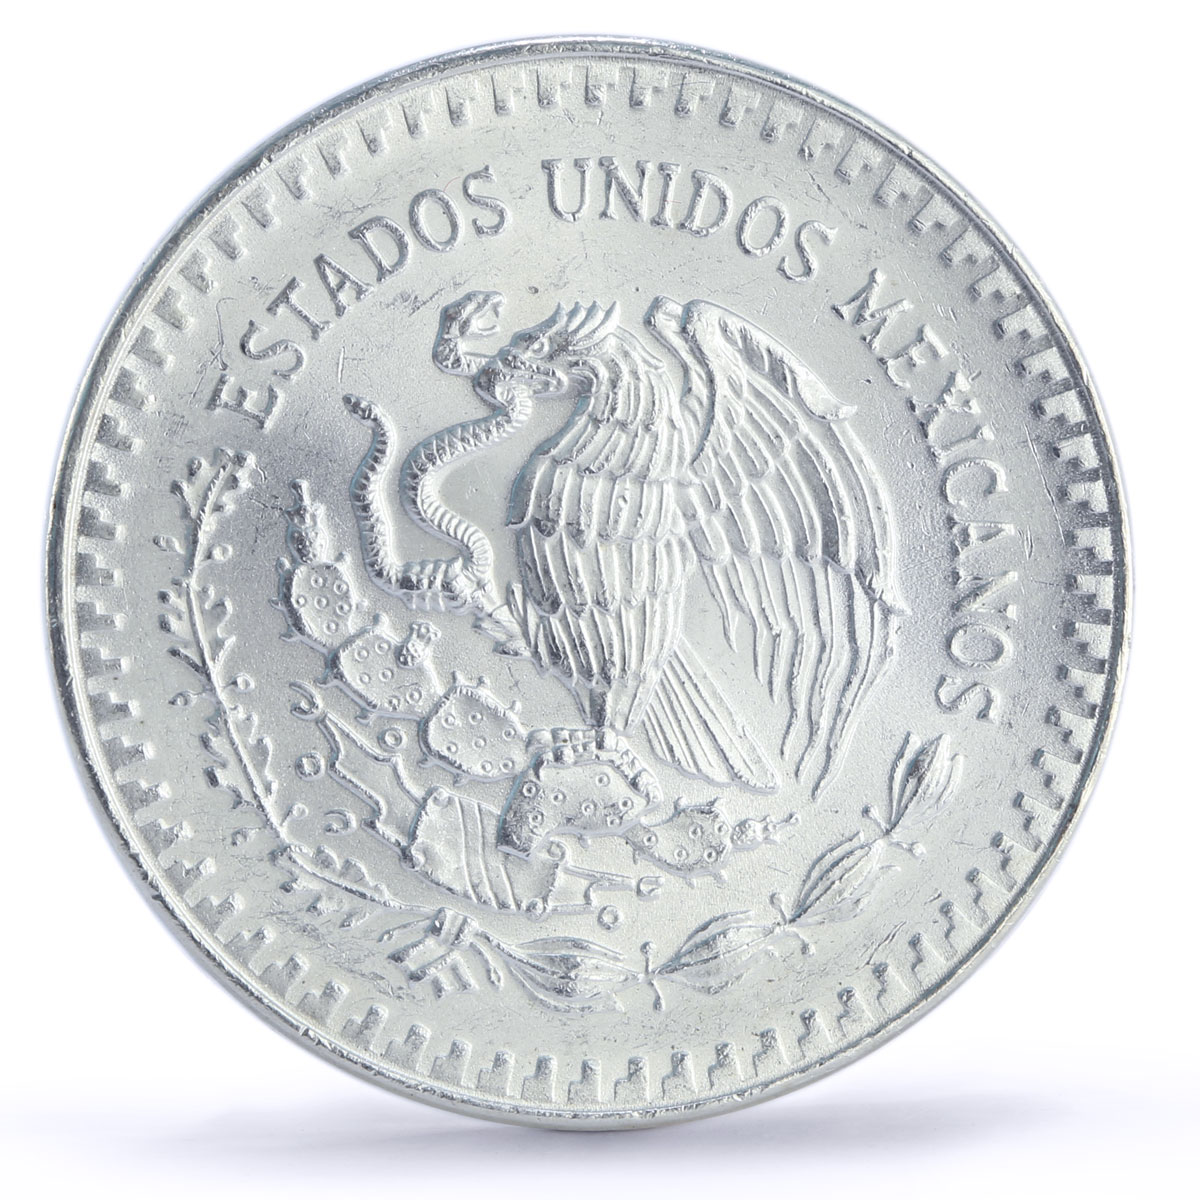 Mexico 1 onza Libertad Angel of Independence silver coin 1988